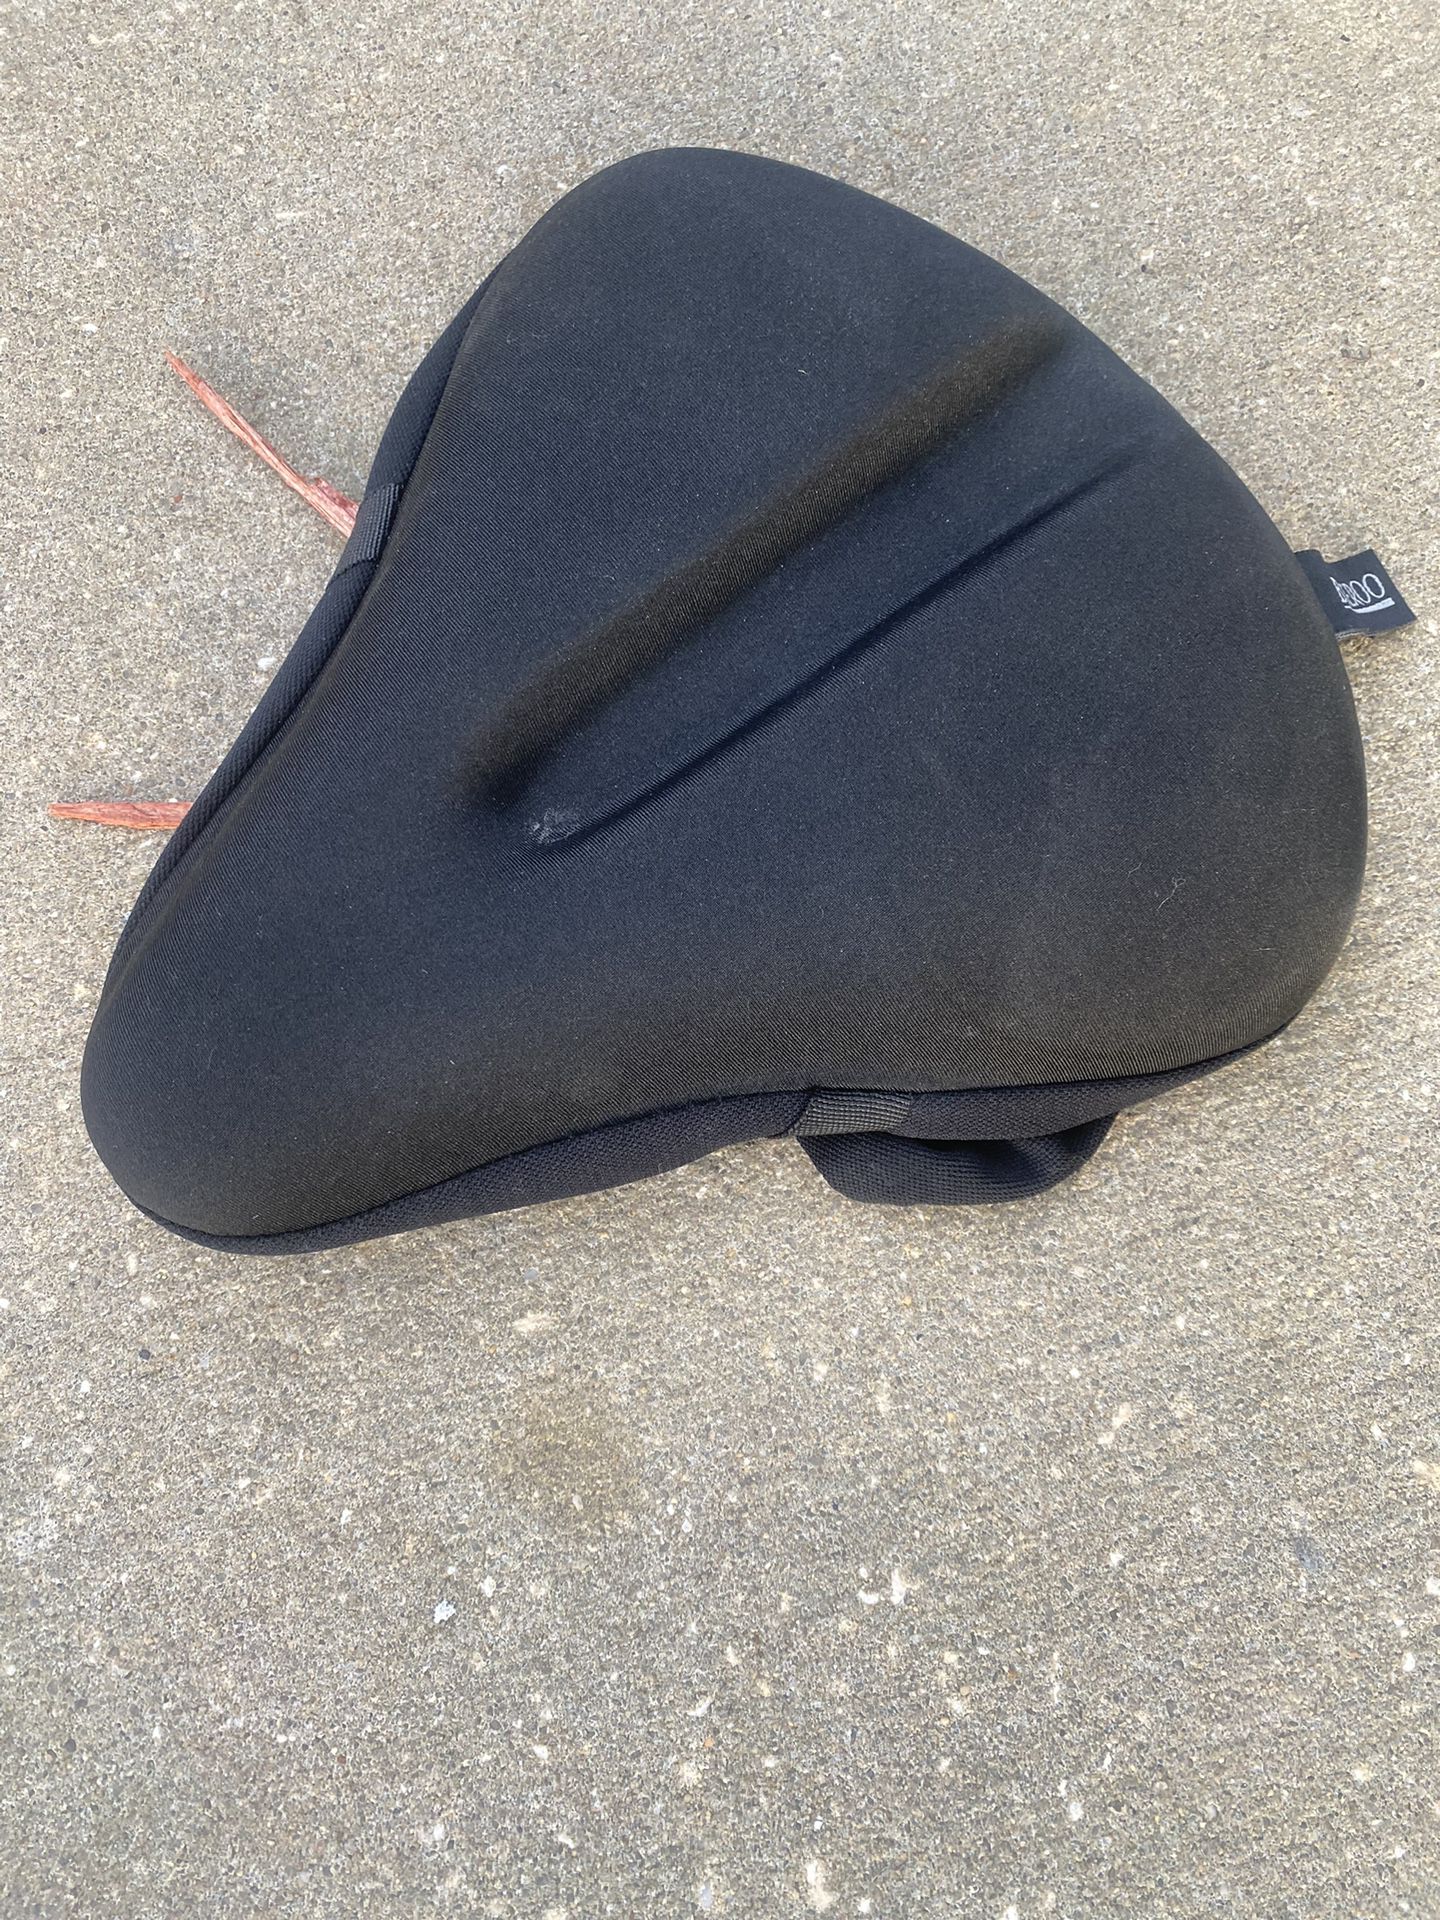 Bicycle seat cover gel fill